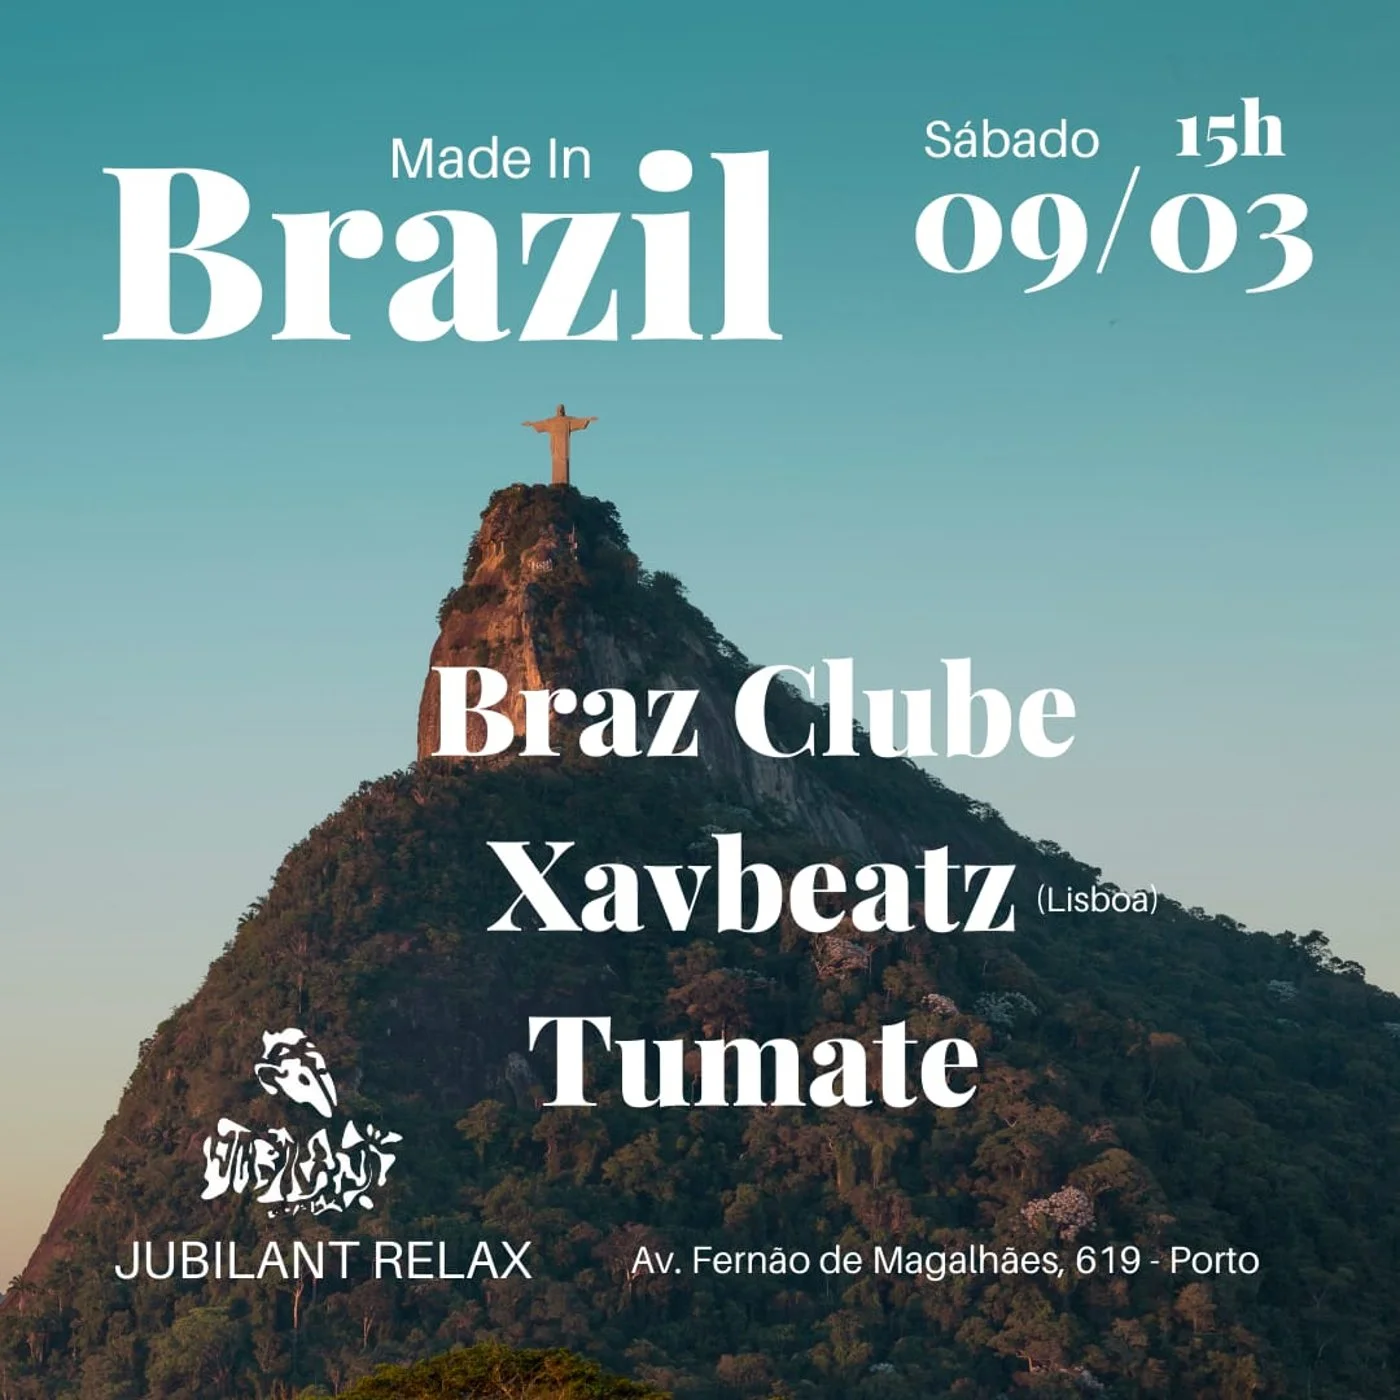 Made in Brazil - Jubilant Relax